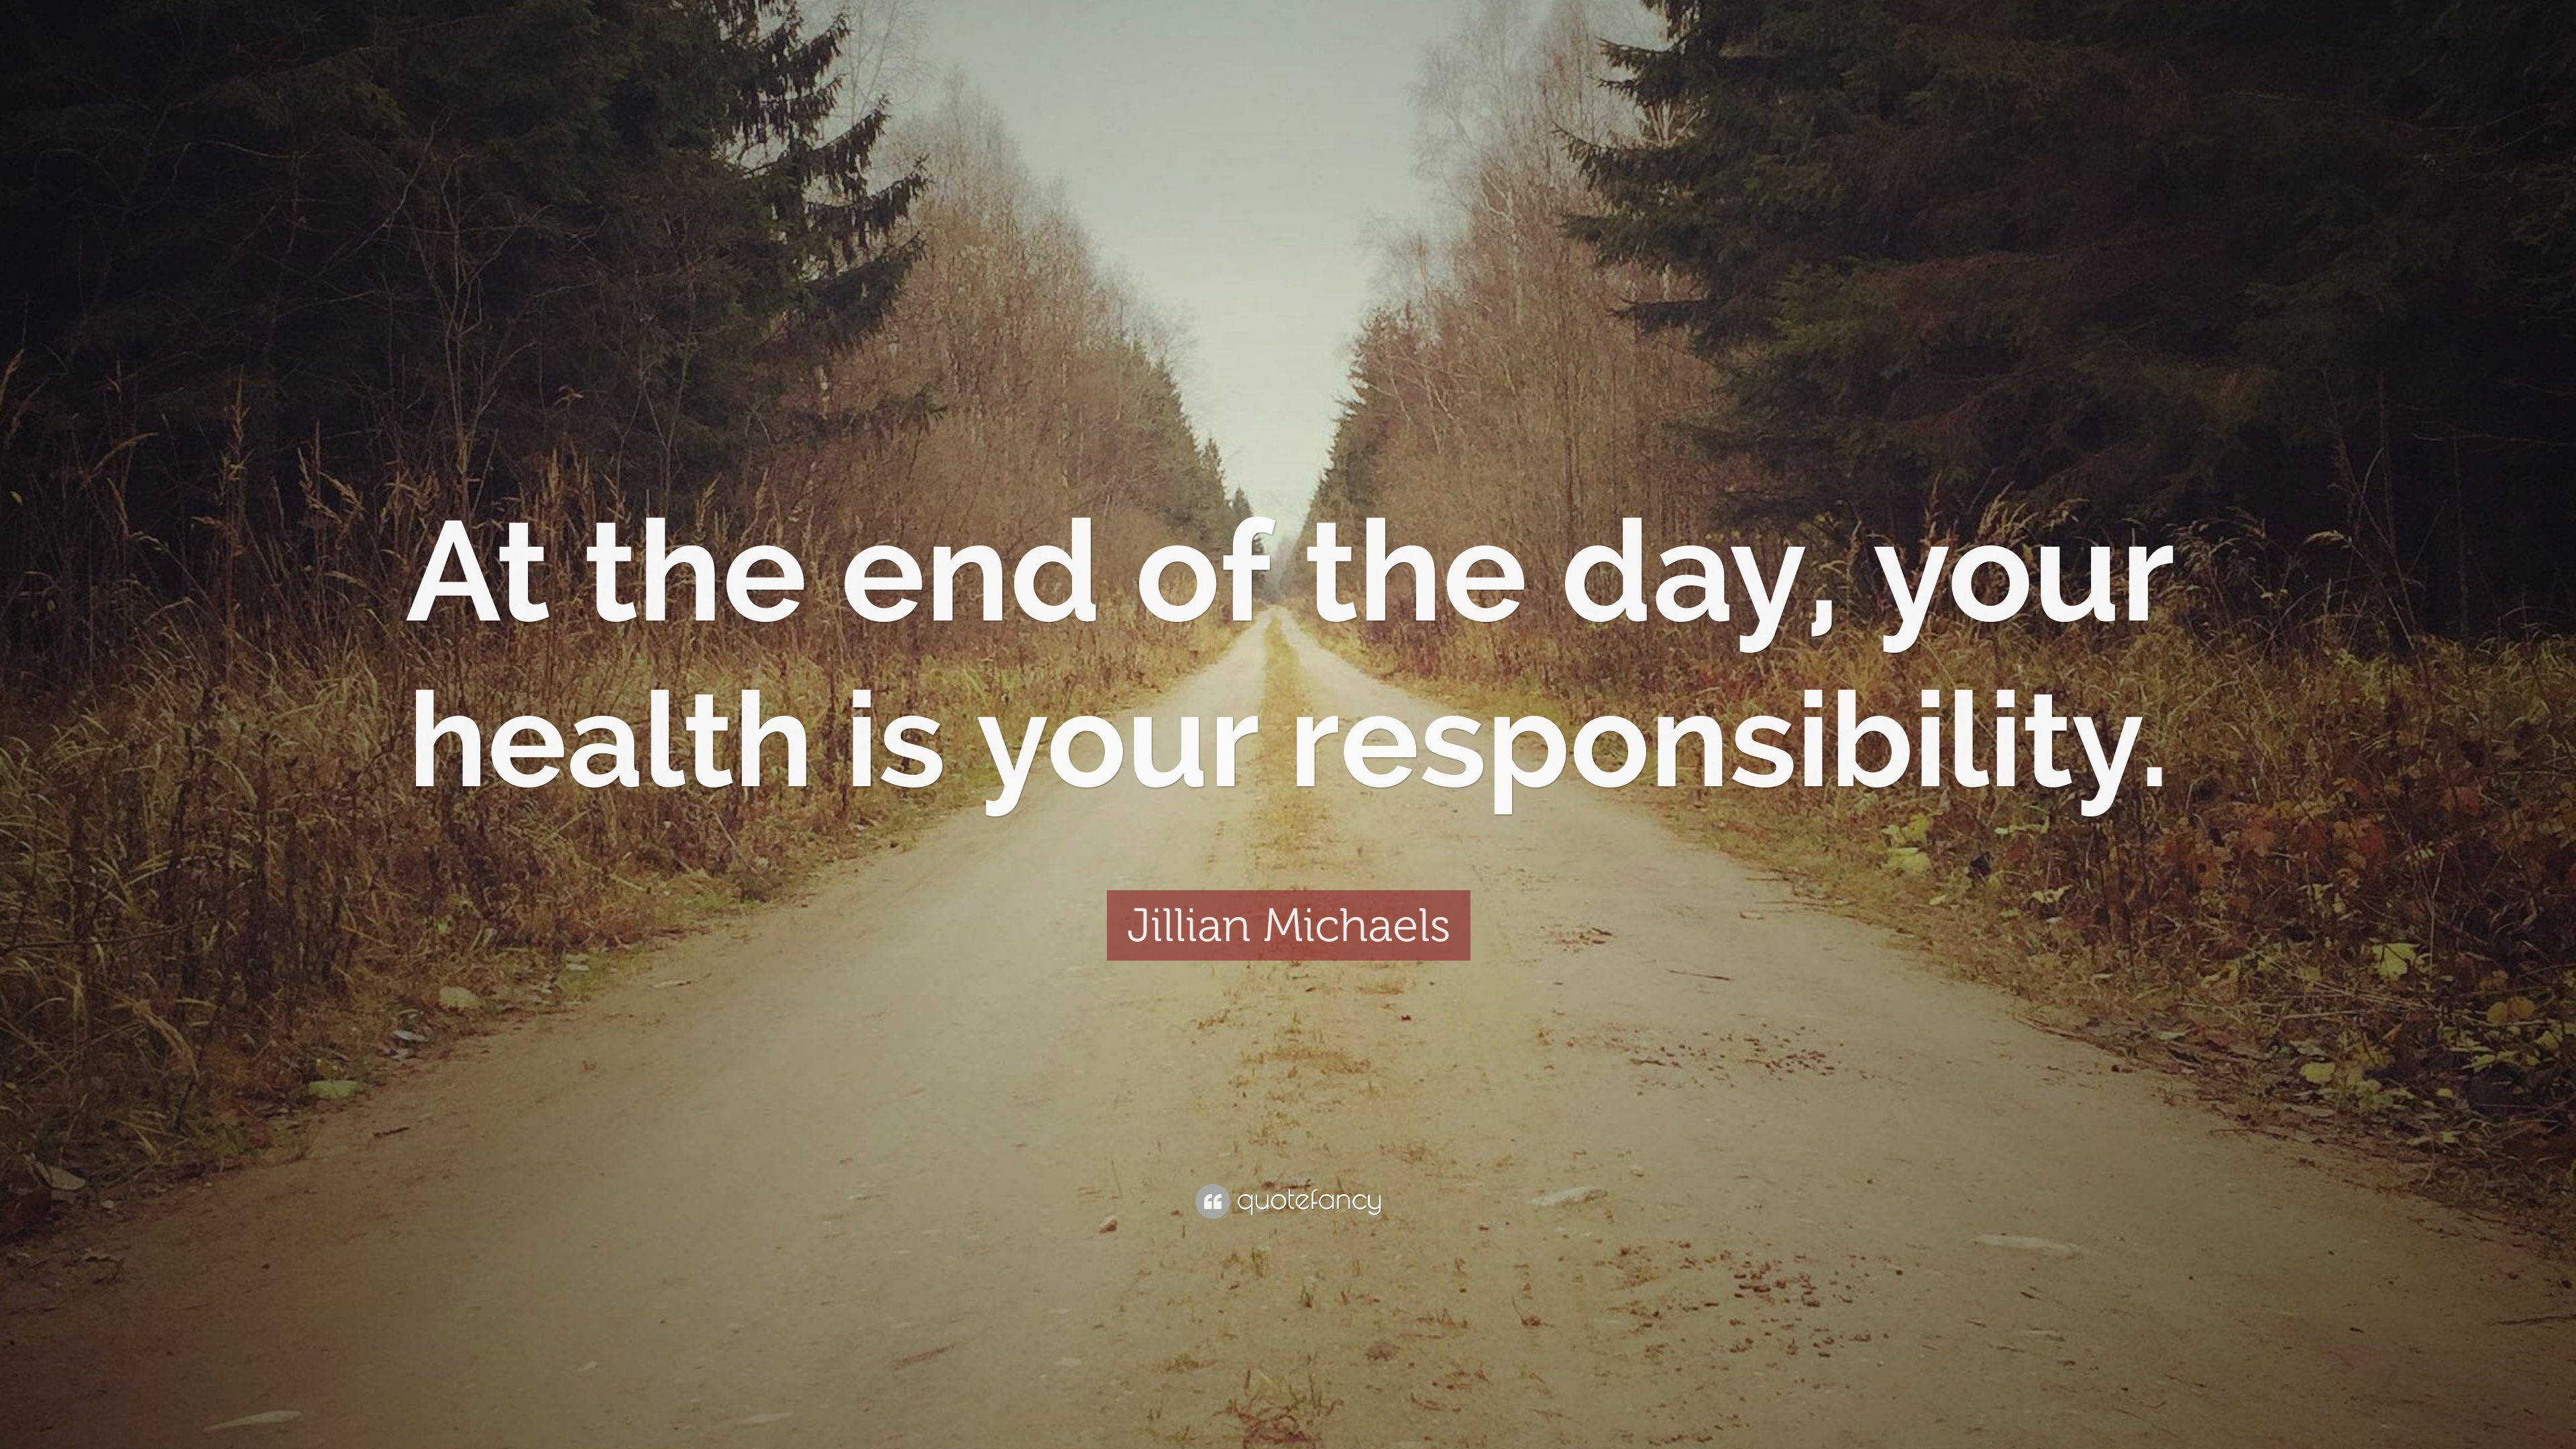 Jillian Michaels Quote: “At the end of the day, your health is your